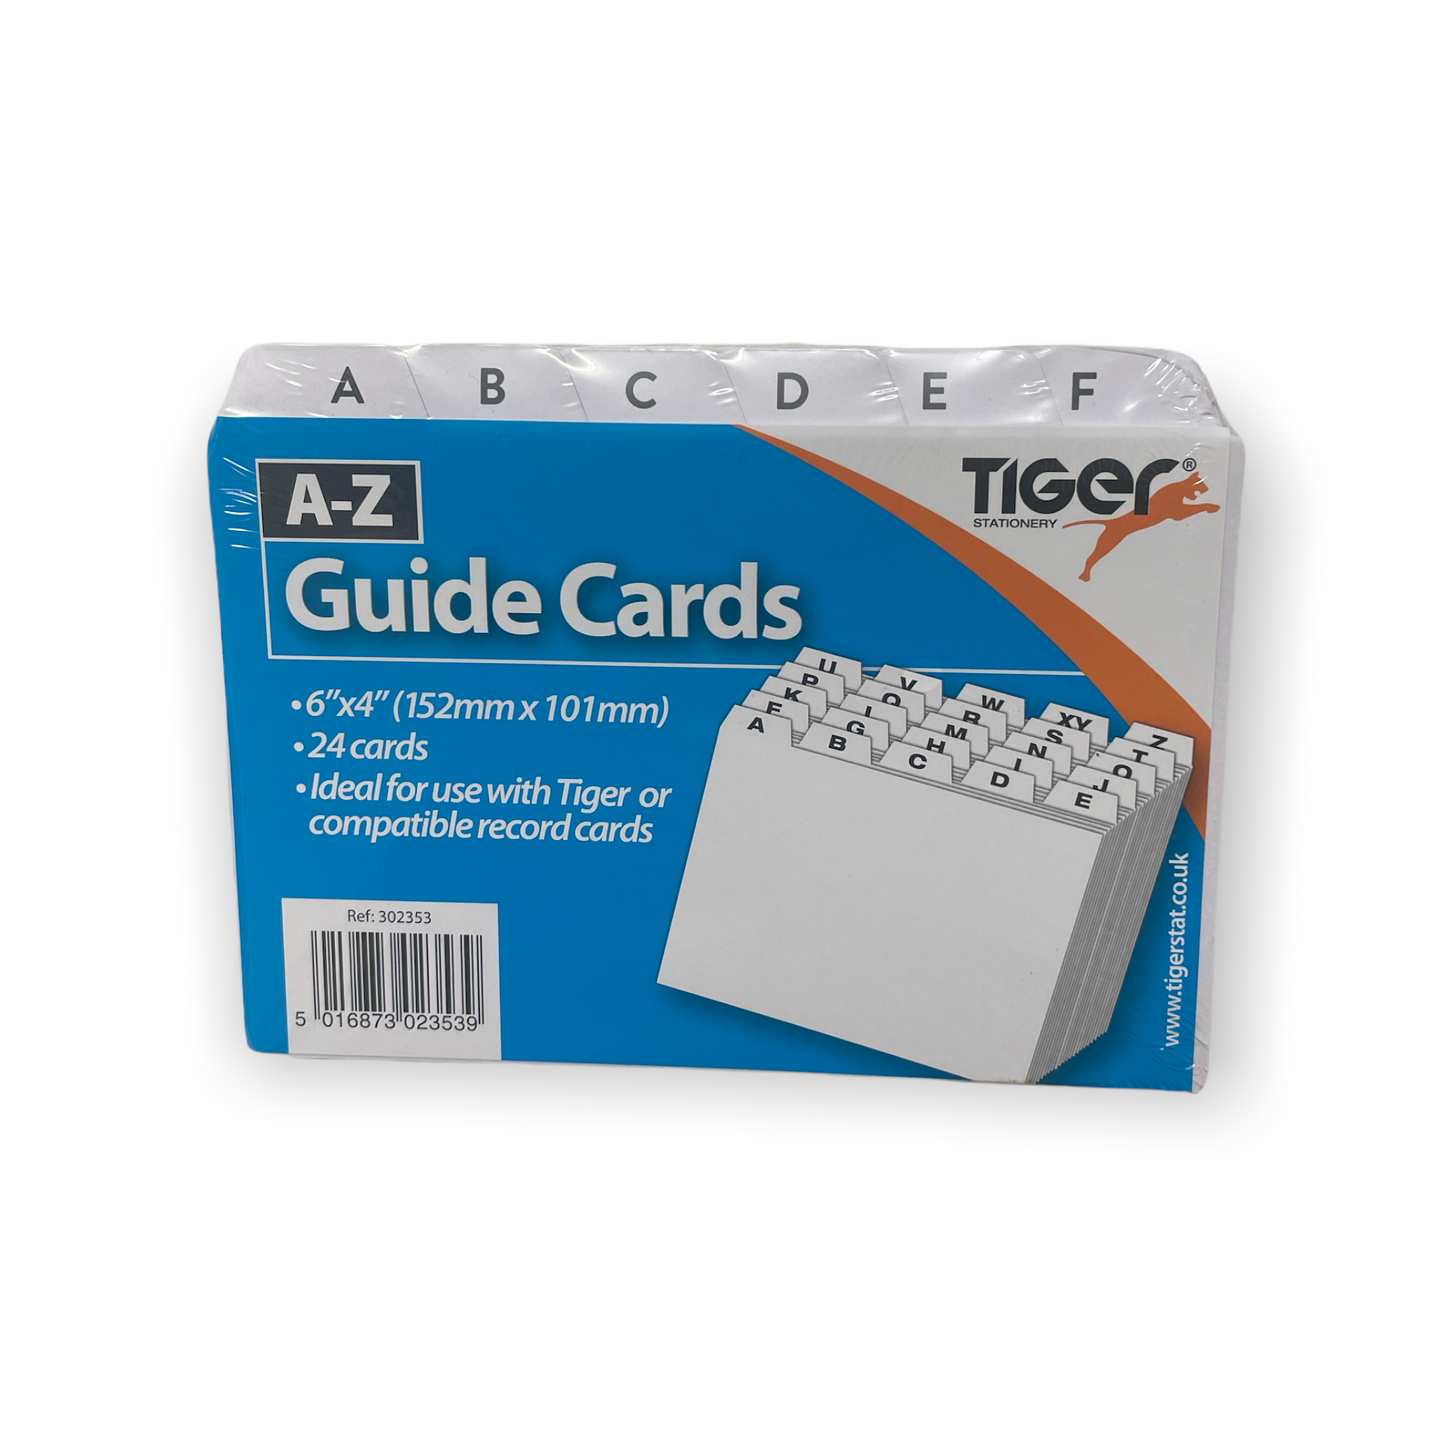 6" x 4" A - Z Guide Cards Tabs 24 Cards